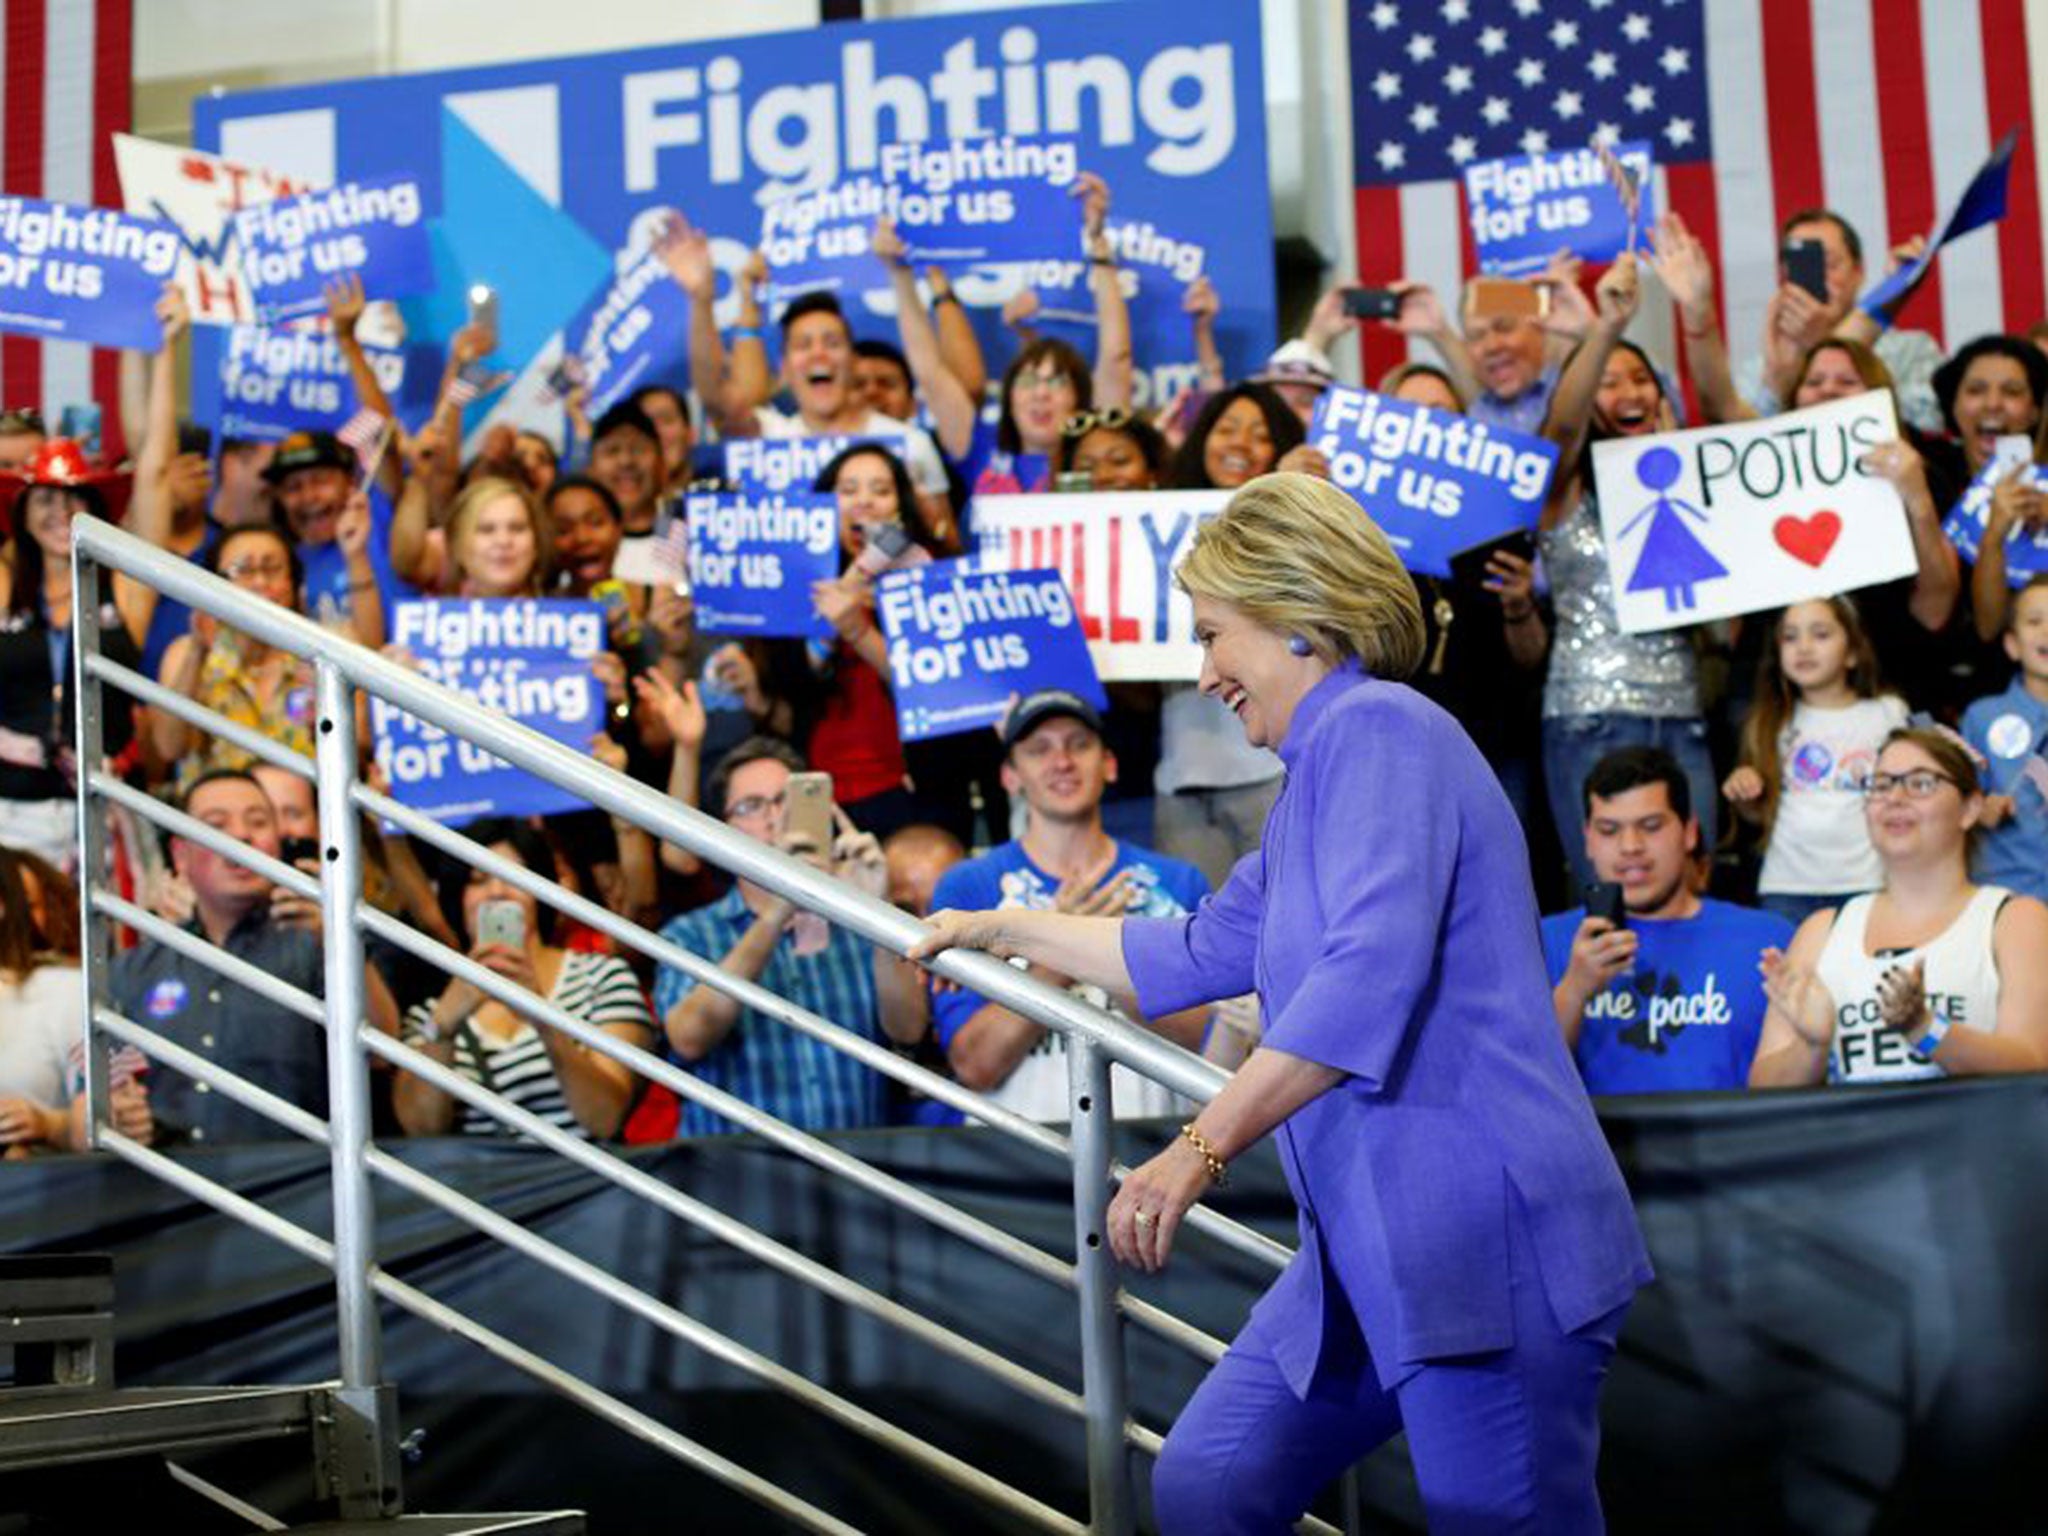 Hillary Clinton campaigns in Califonrnia, just a few steps from the Democratic presidential nomination